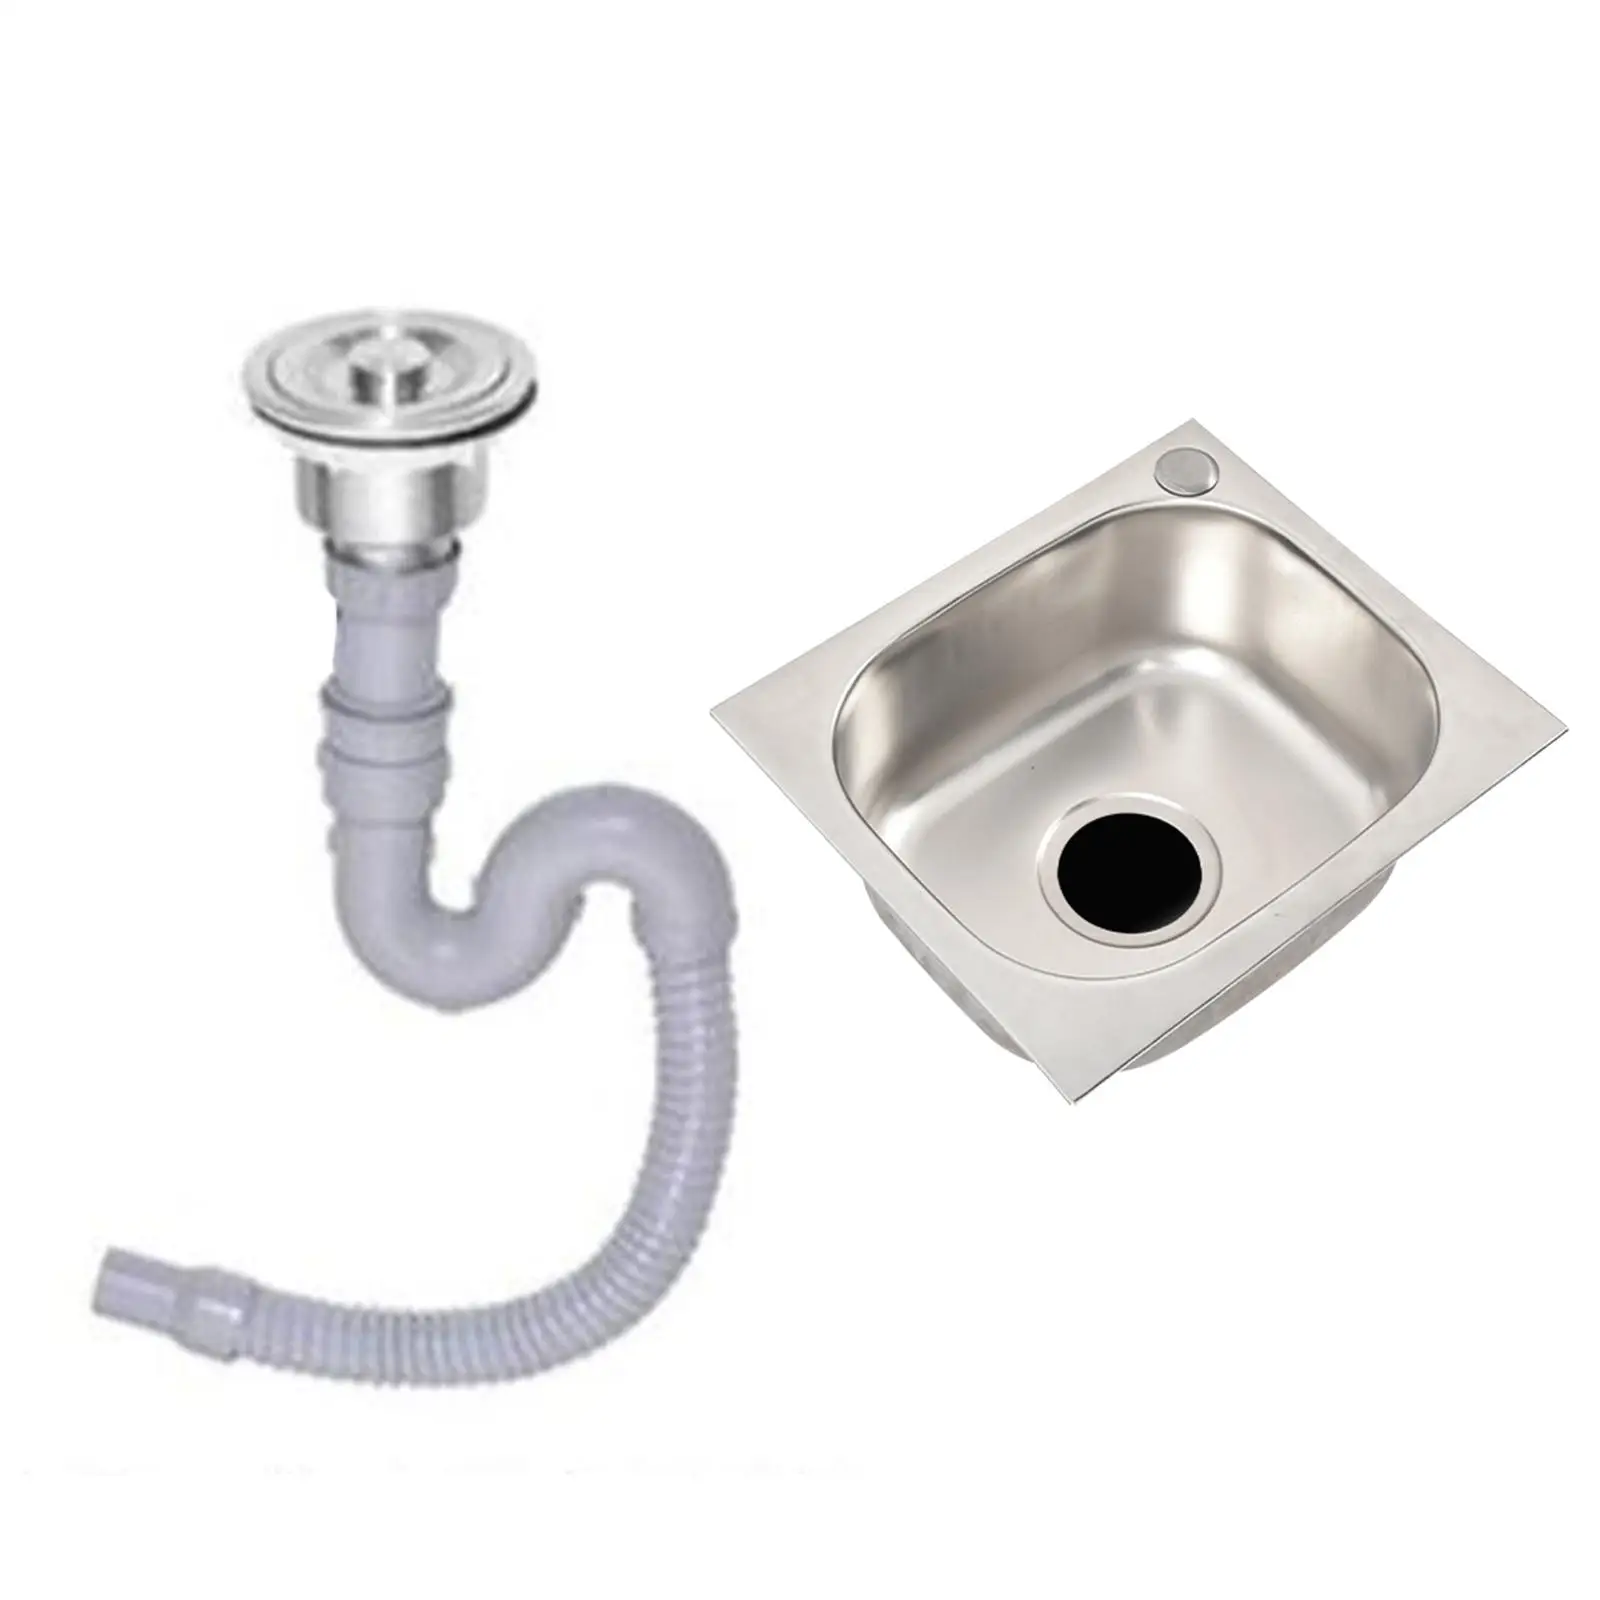 Stainless Steel Kitchen Sink Heavy Duty with Water Pipe 37cmx32cmx14cm Rustproof Fast Drainage 5.5